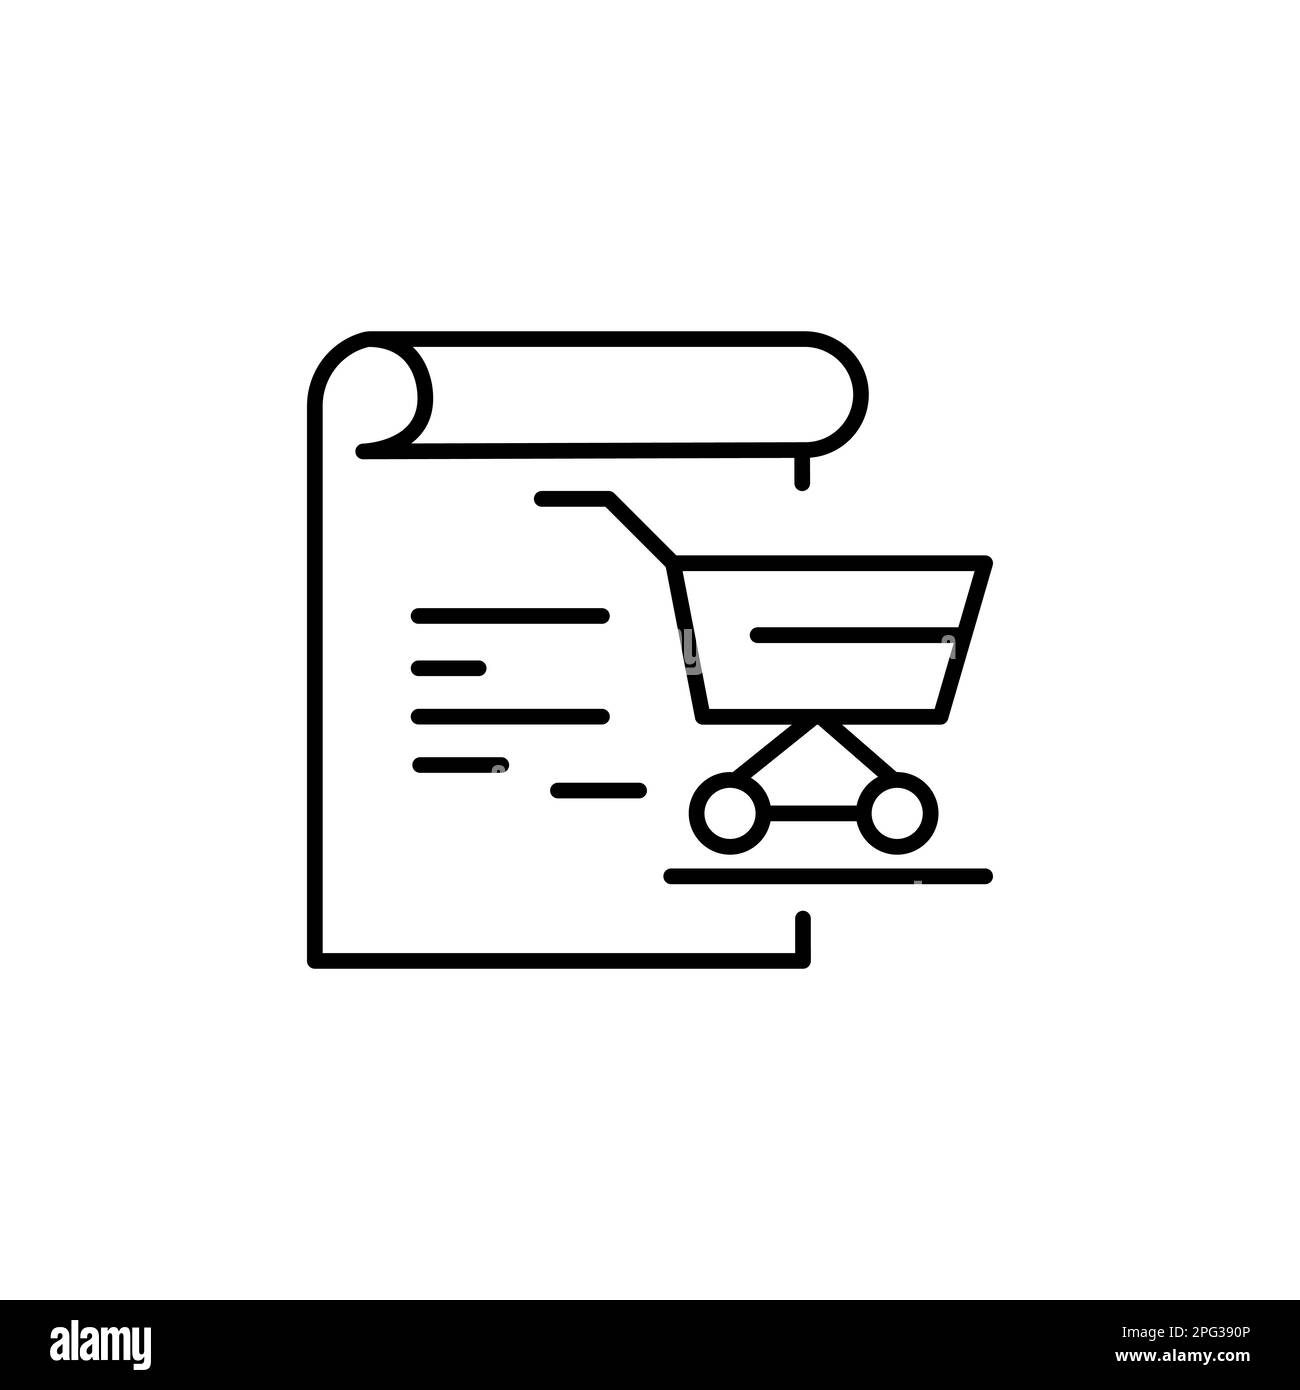 Retail Store Supplies Line Icons Trade Shop Equipment Signs Commercial  Objects Cash Register Scales Shopping Cart Shelving Display Cases Thin  Linear Colored Signs For Warehouse Store Stock Illustration - Download  Image Now 